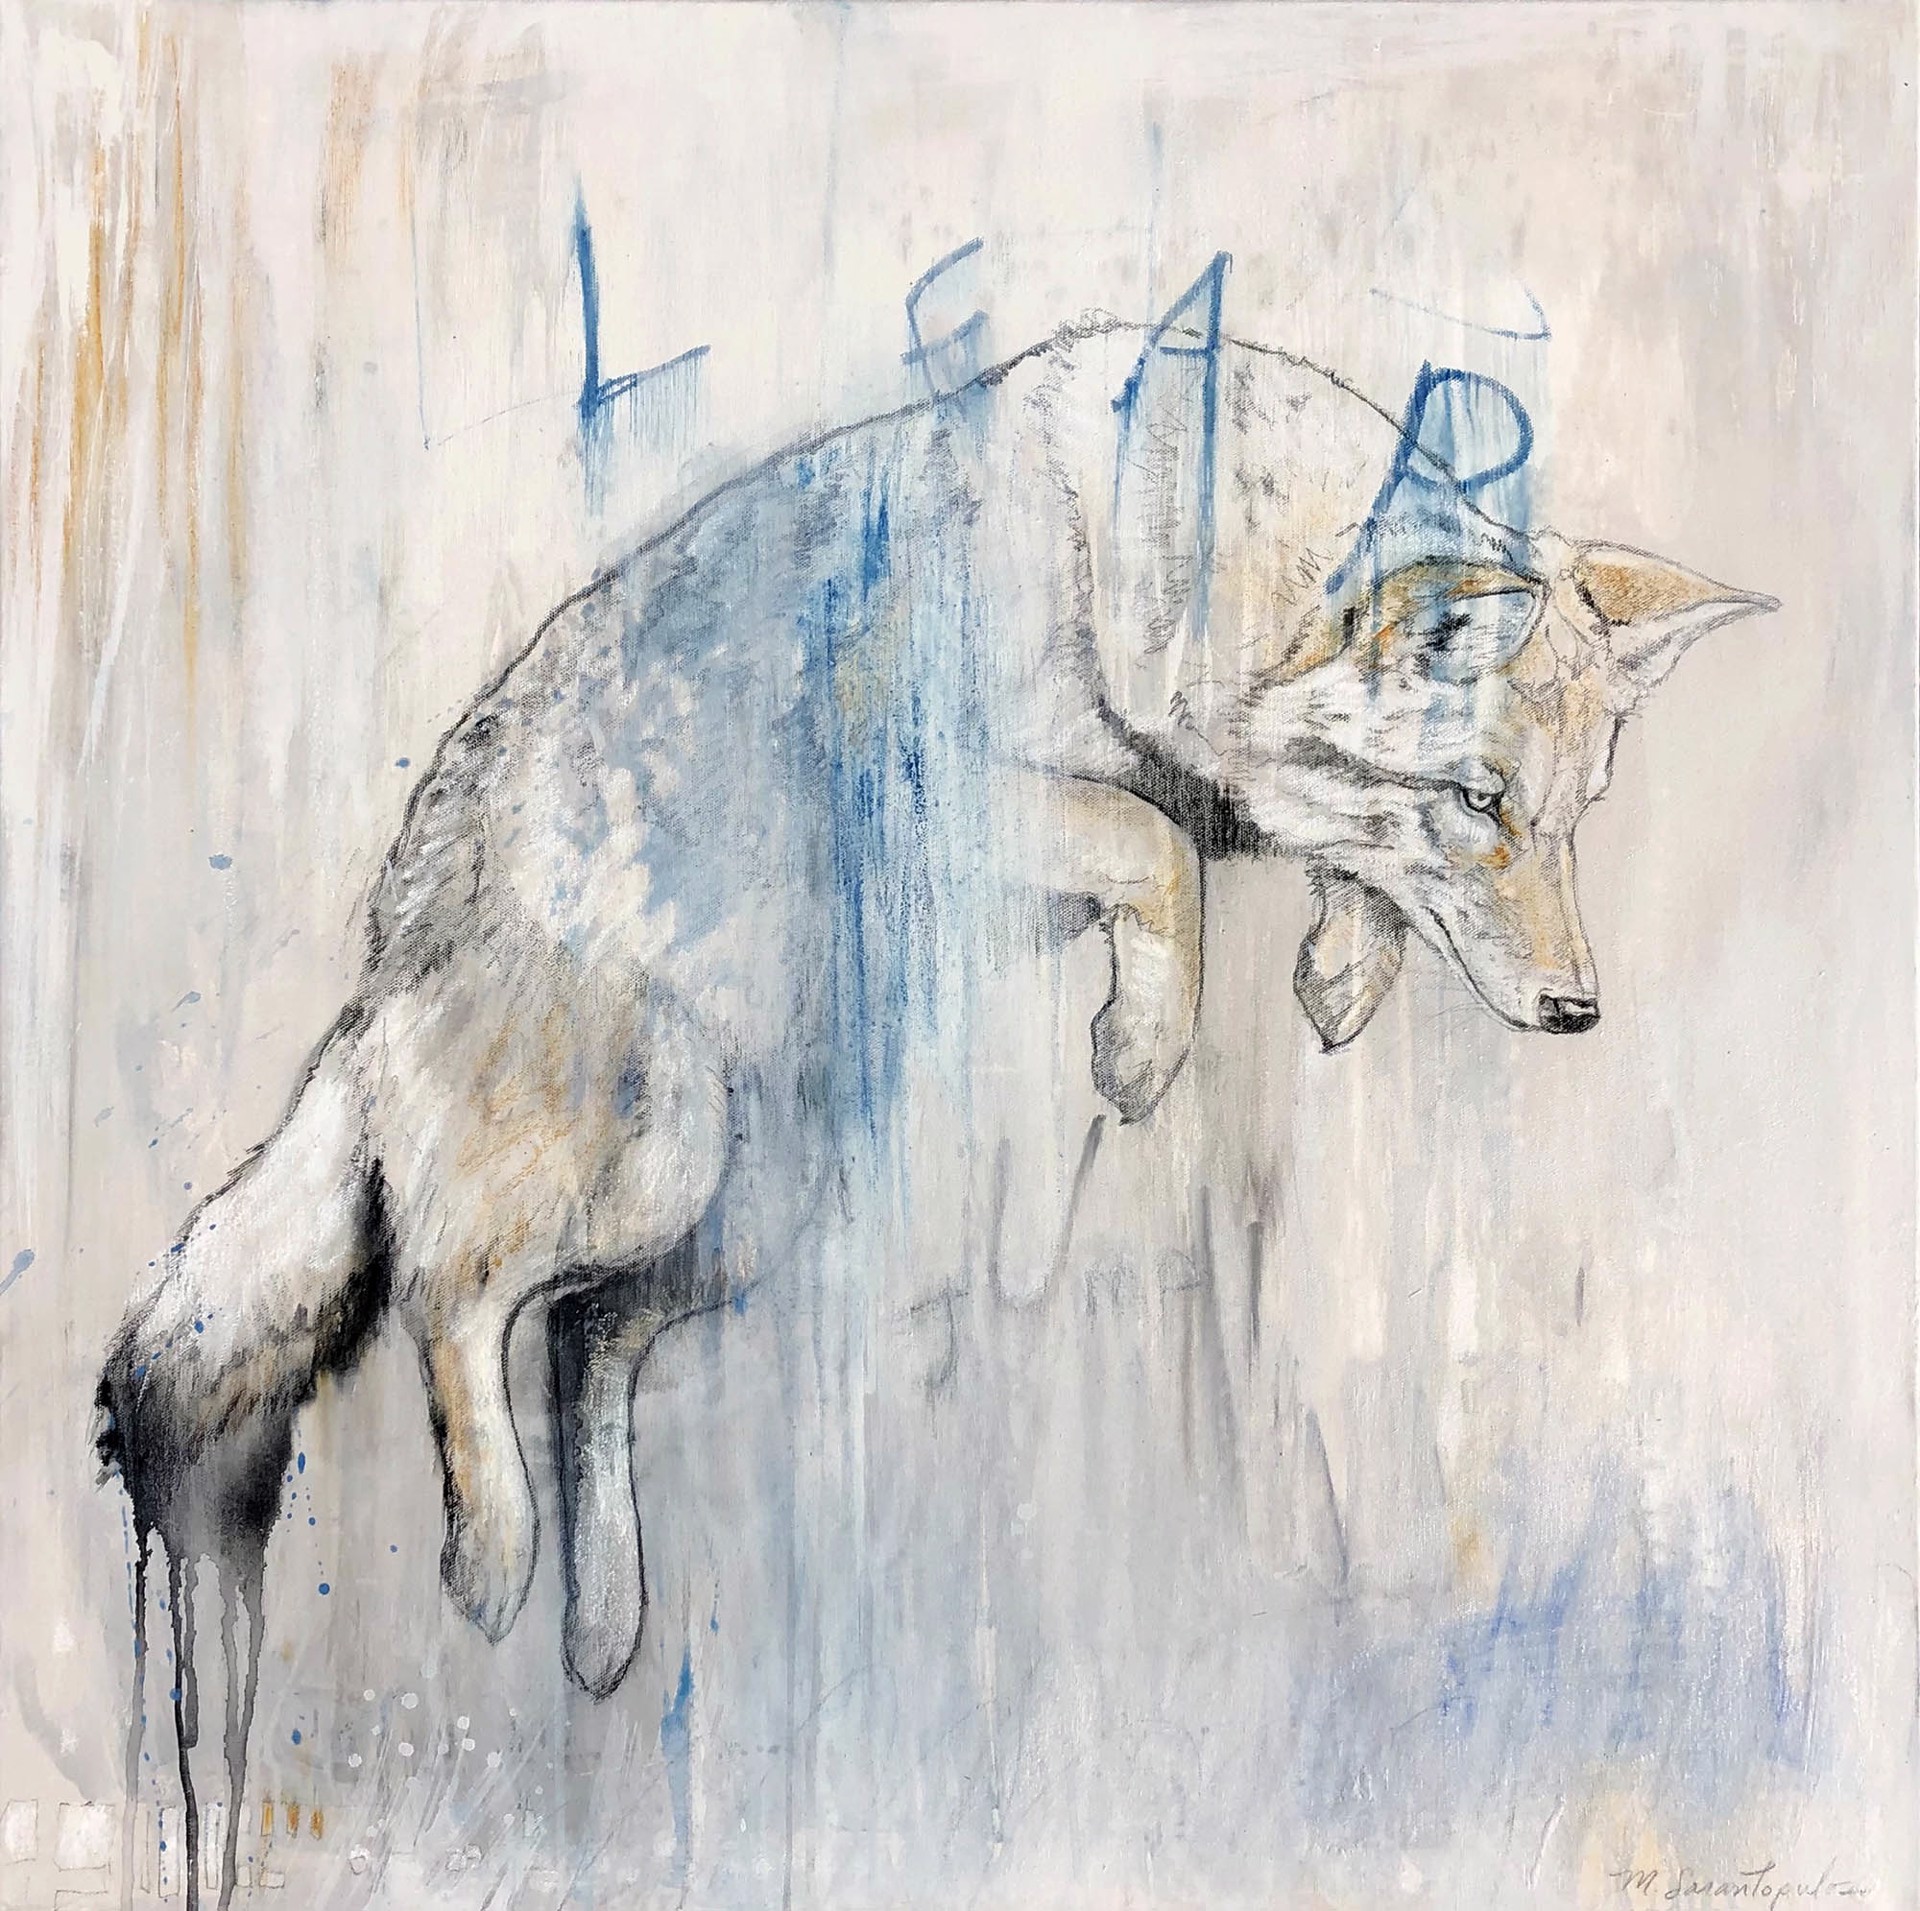 Original Mixed Media Painting Featuring A Jumping Coyote Sketched Onto Abstract Neutral Background With Blue Text